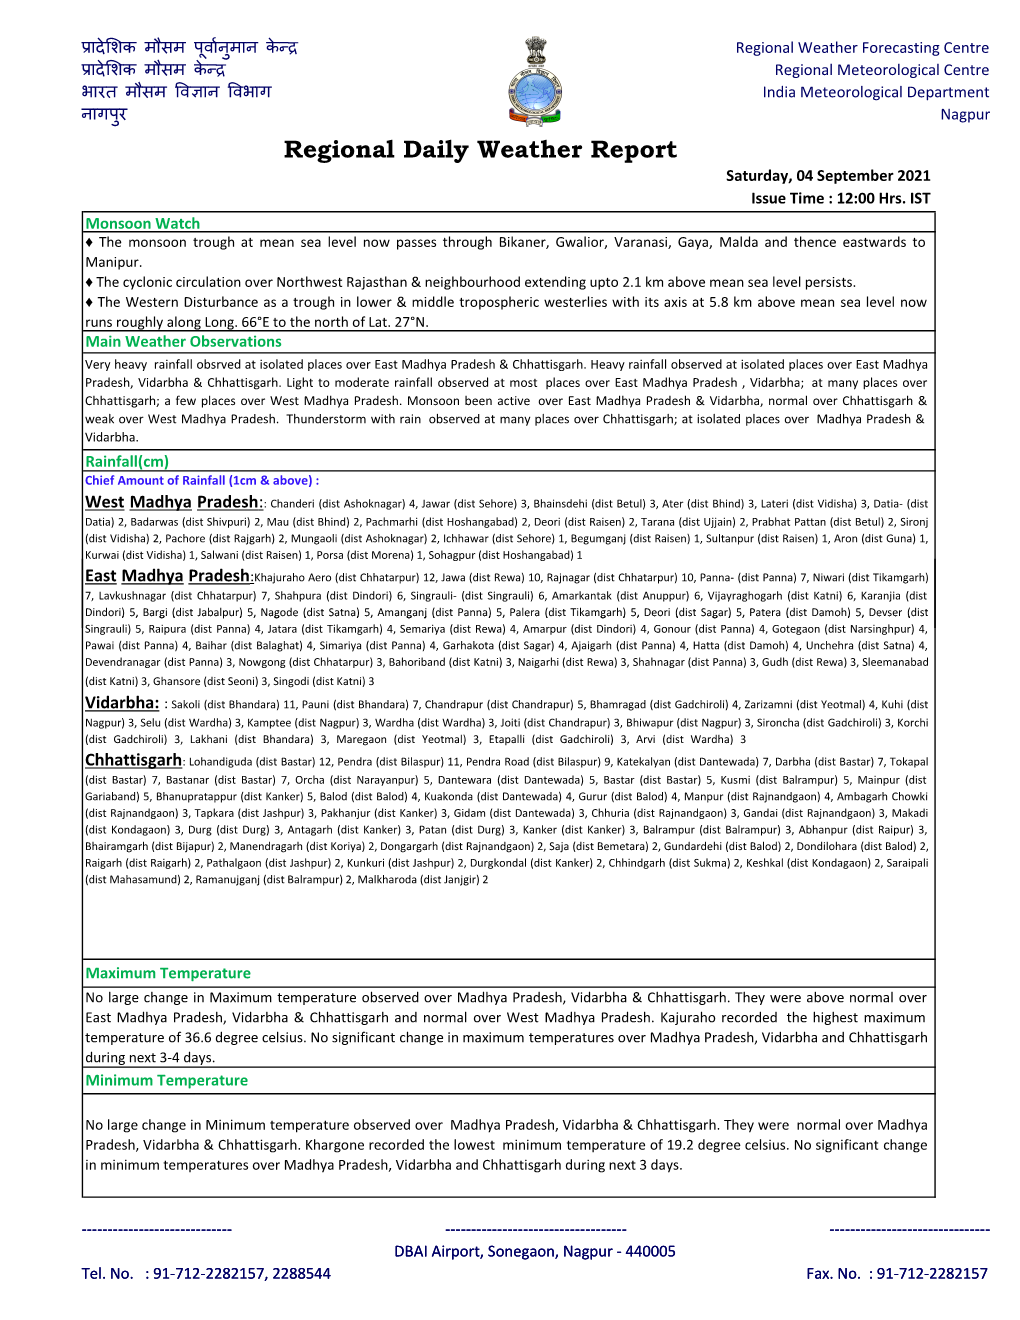 Regional Daily Weather Report Saturday, 04 September 2021 Issue Time : 12:00 Hrs